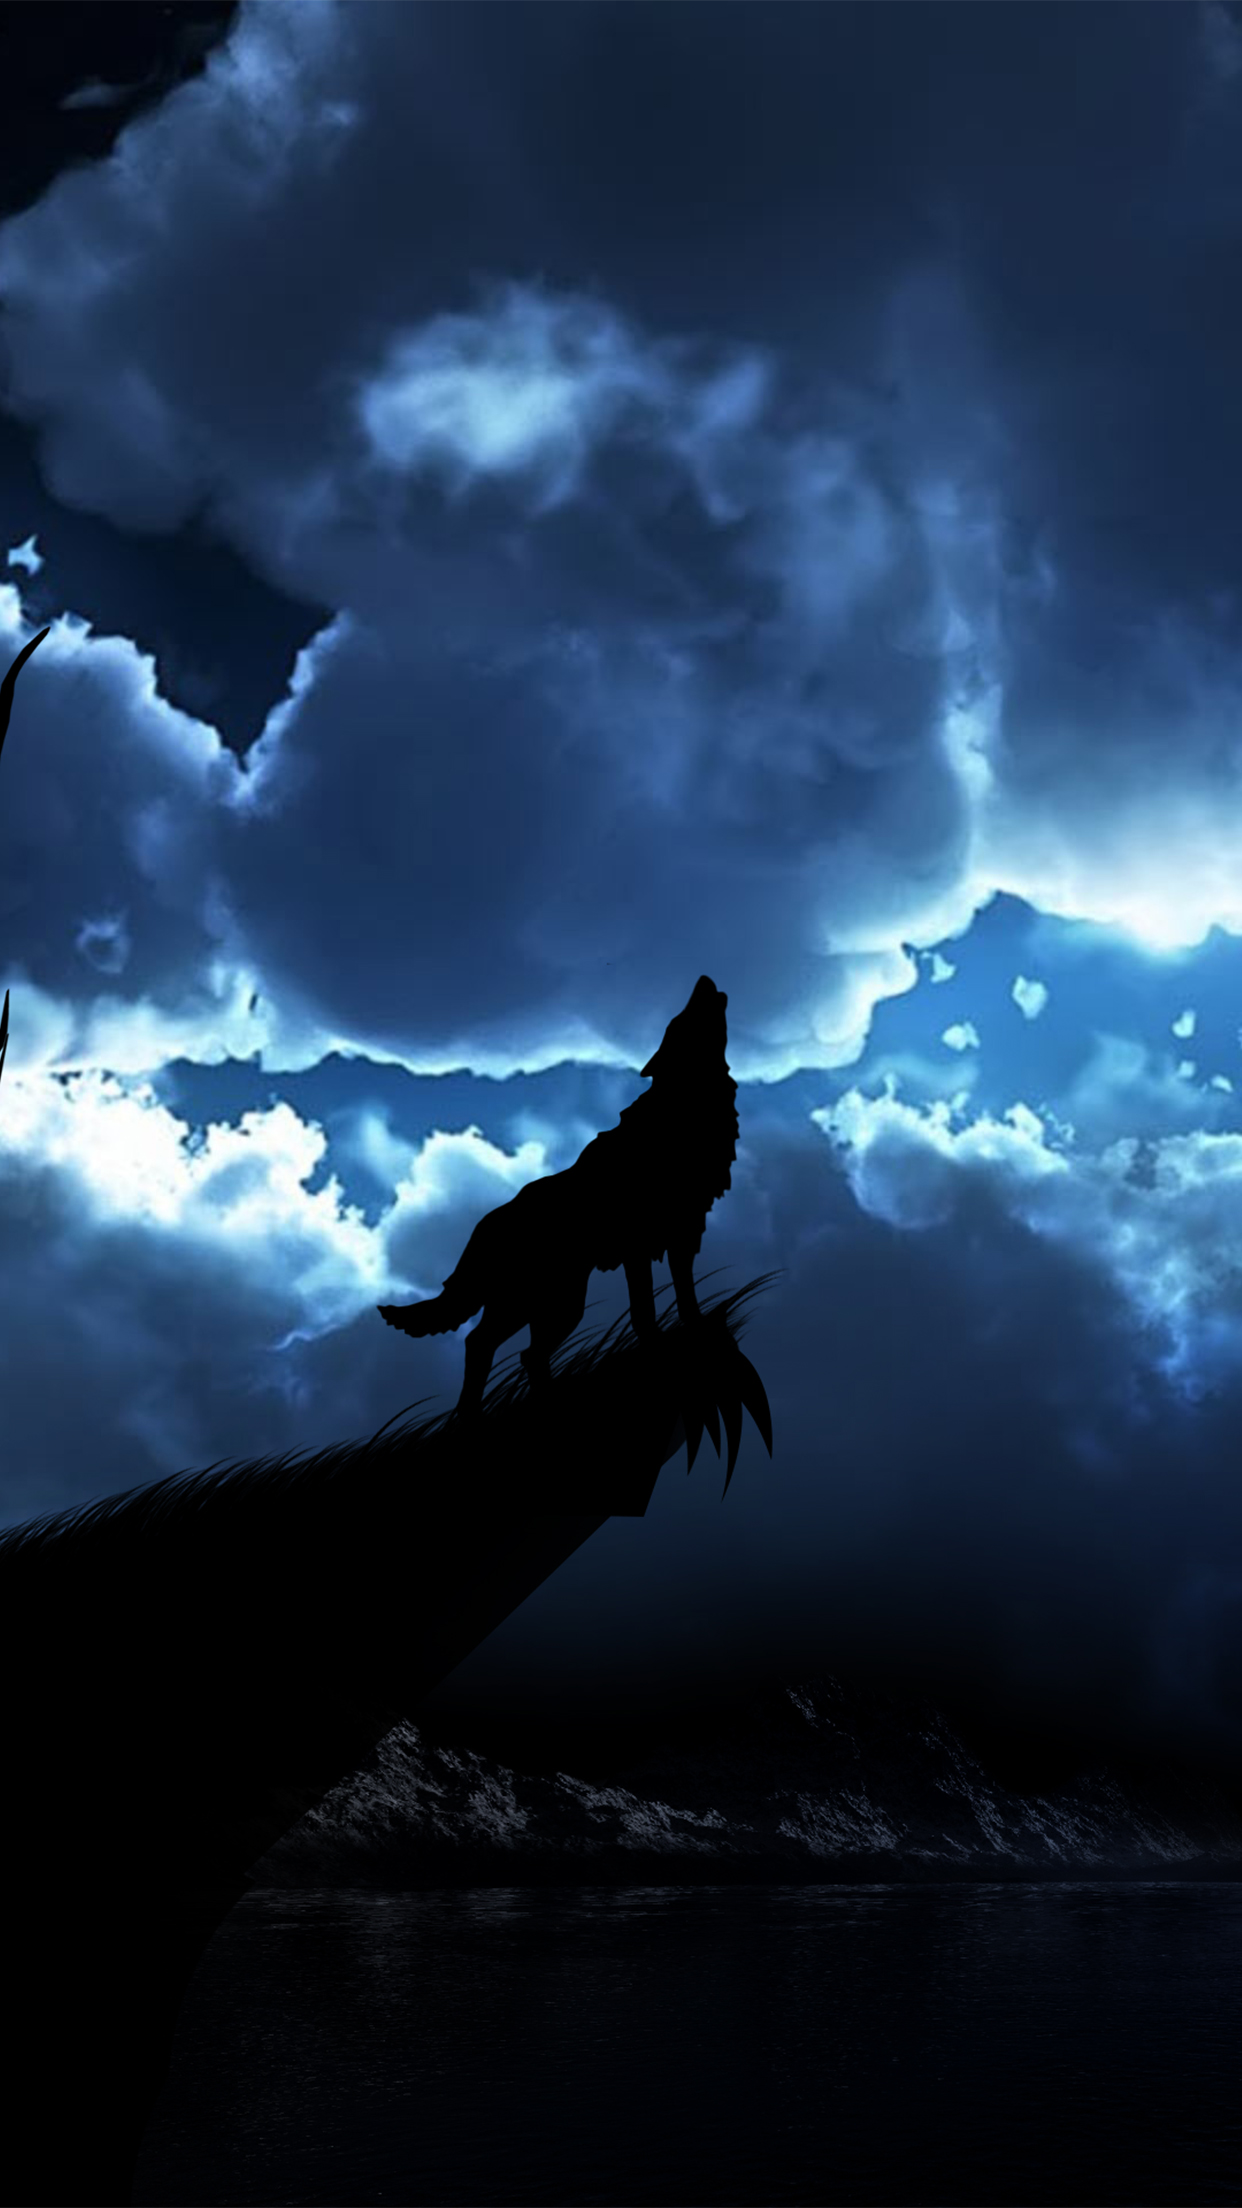 Wolf Night Wallpaper for iPhone Pro Max, X, 6